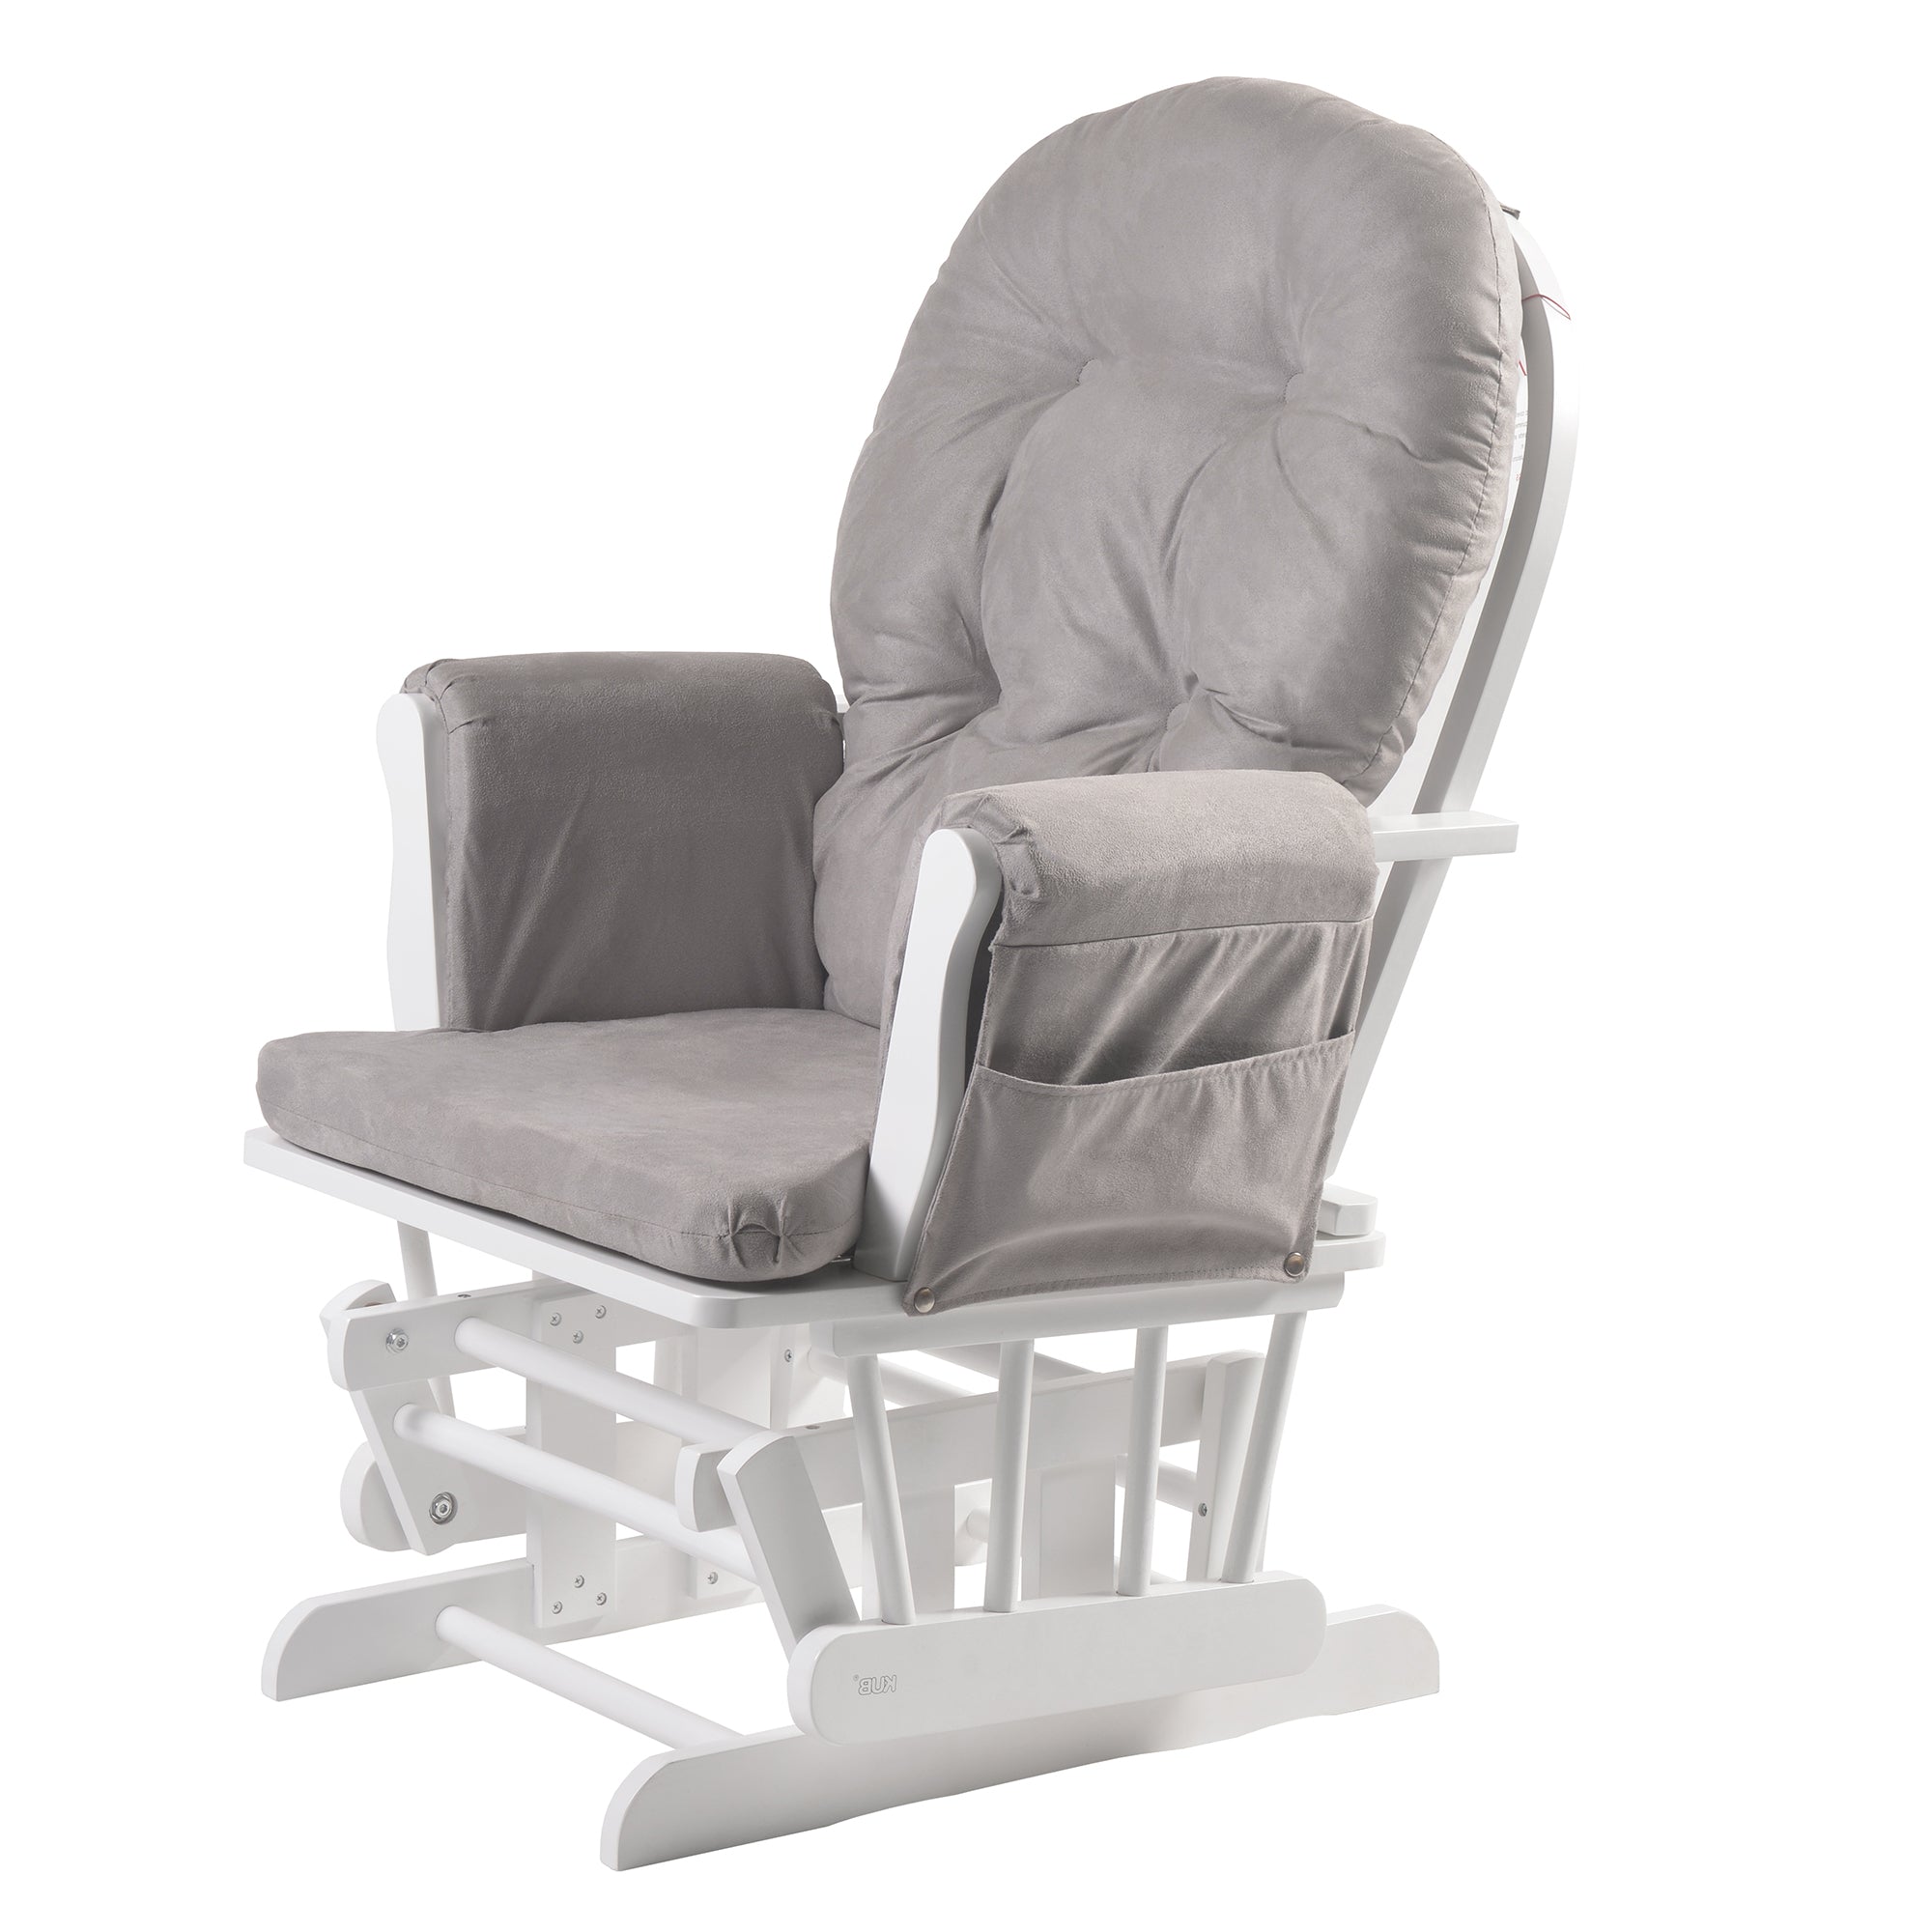 Haywood Nursing Chair - 15% OFF Applied at Checkout